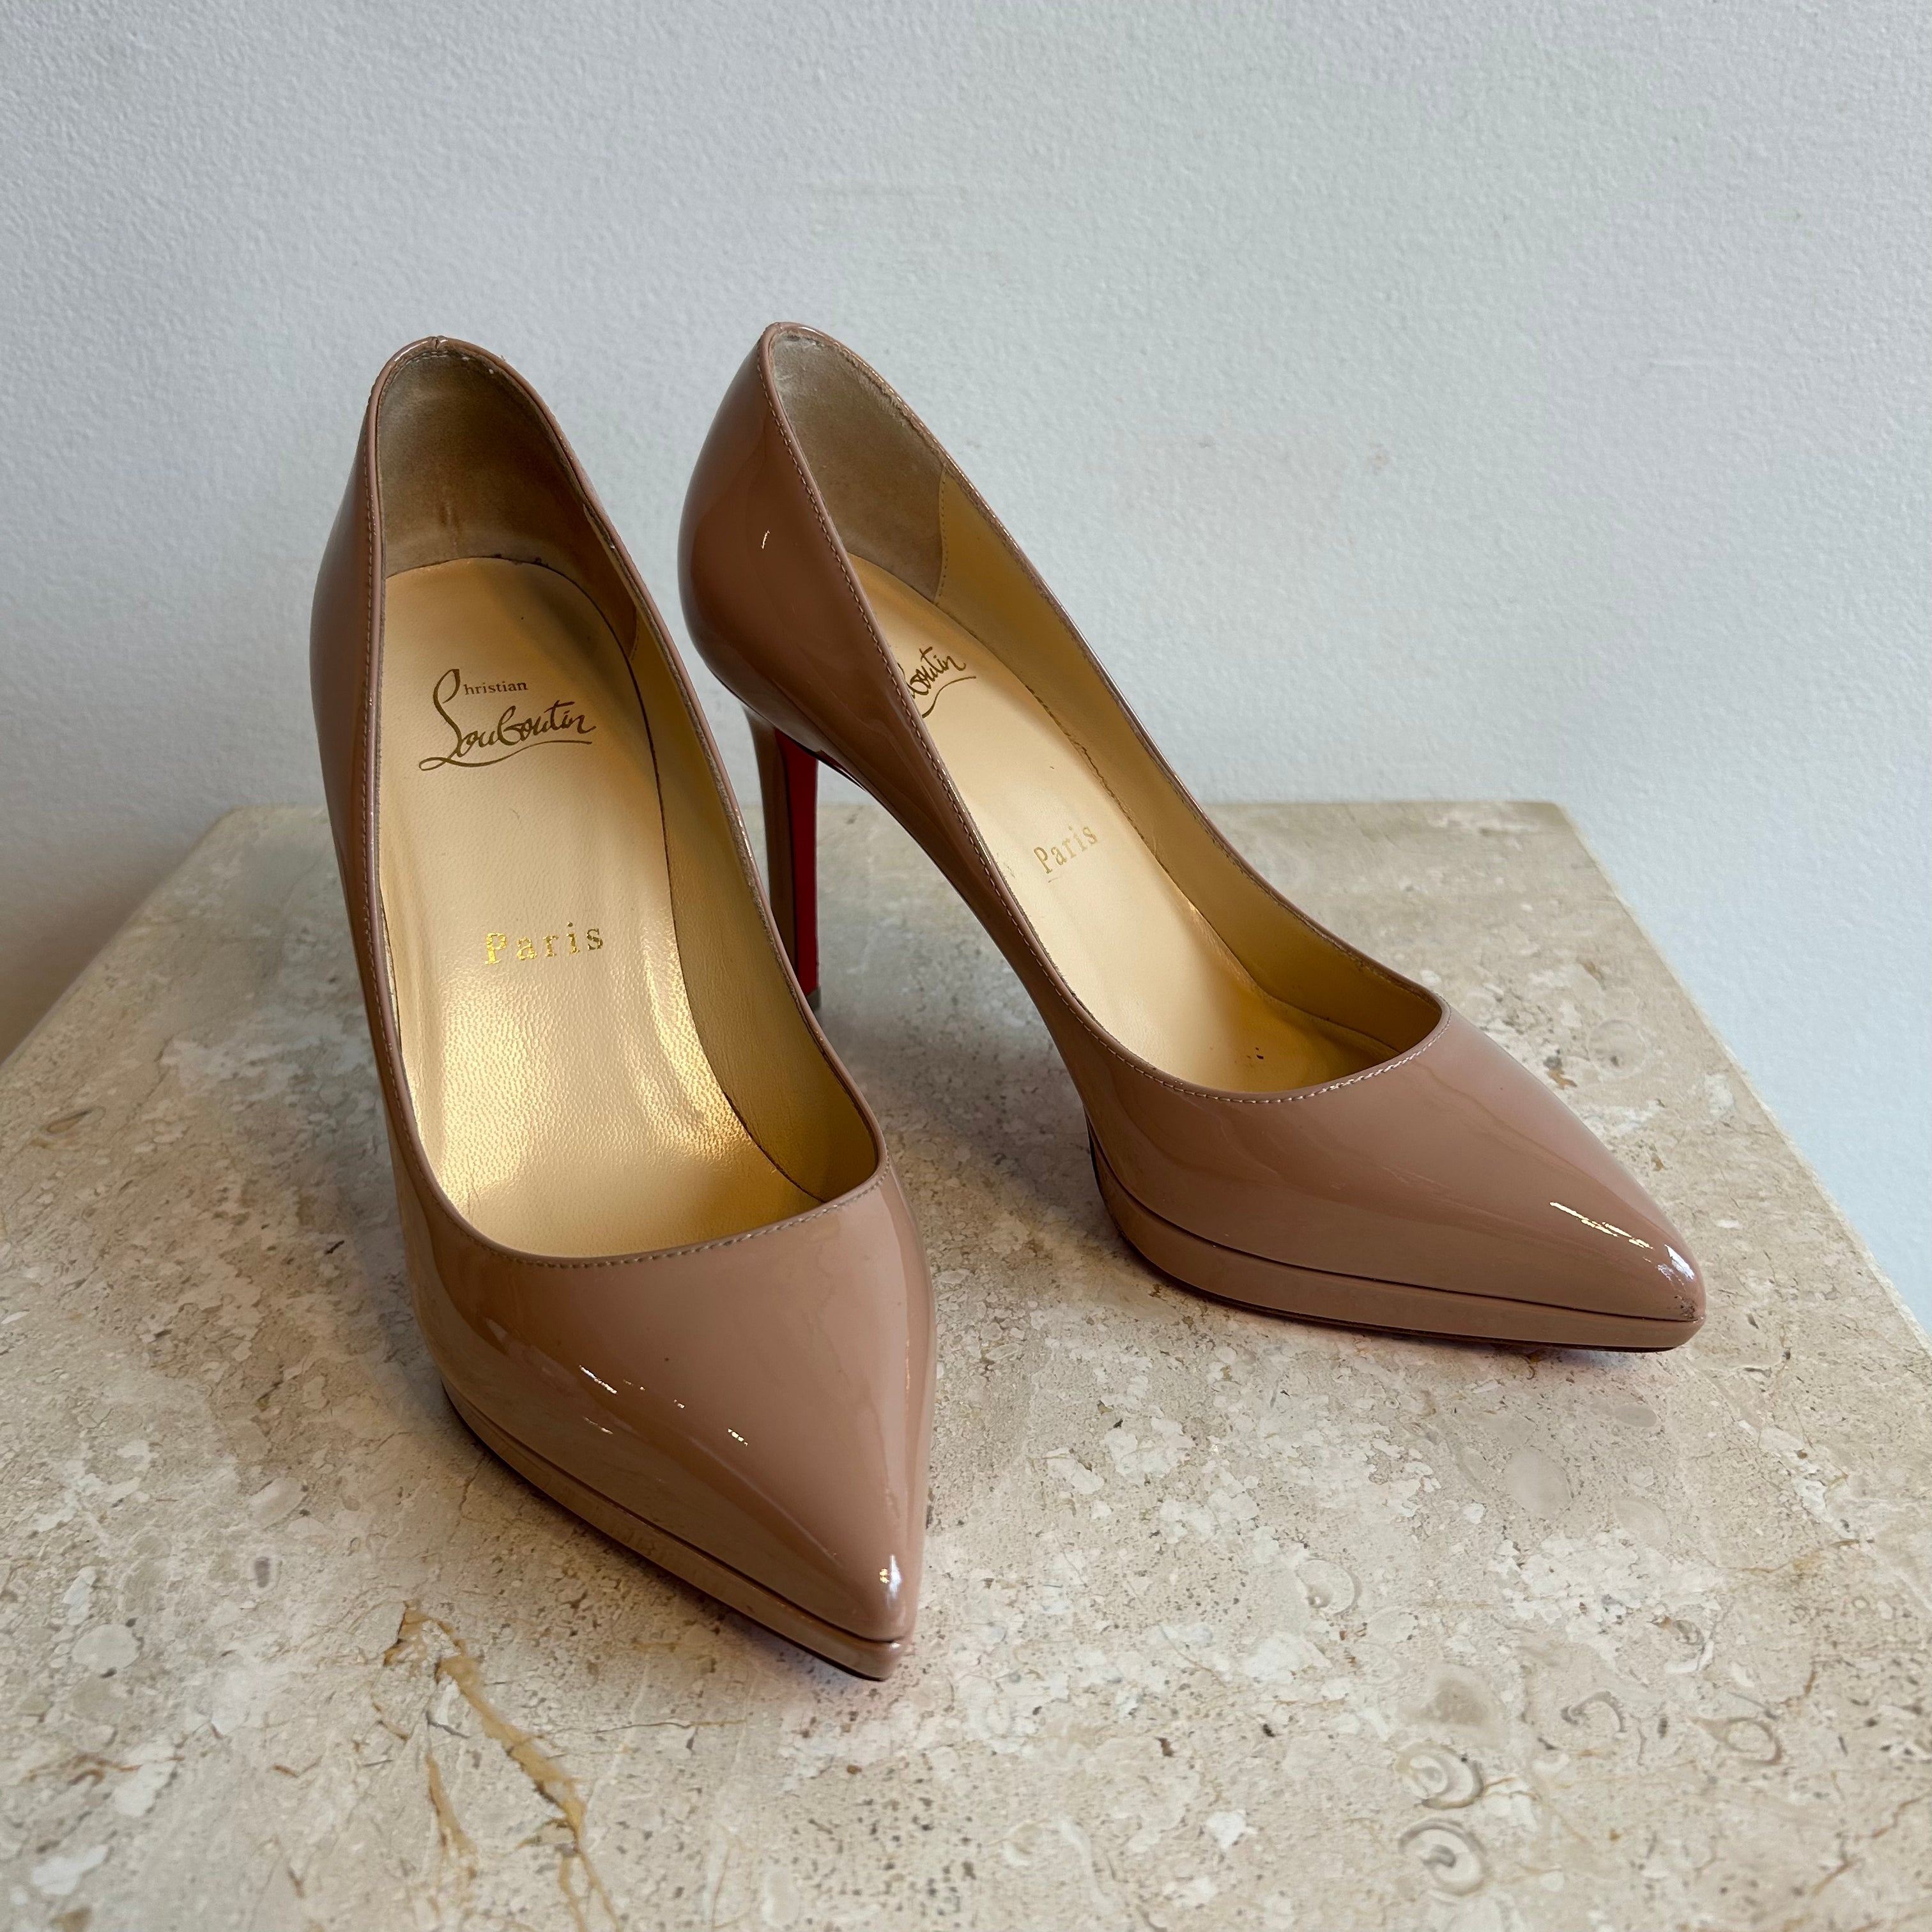 Pre-Owned CHRISTIAN LOUBOUTIN Pigalle Plato Nude Patent Pump 100 - Size 36